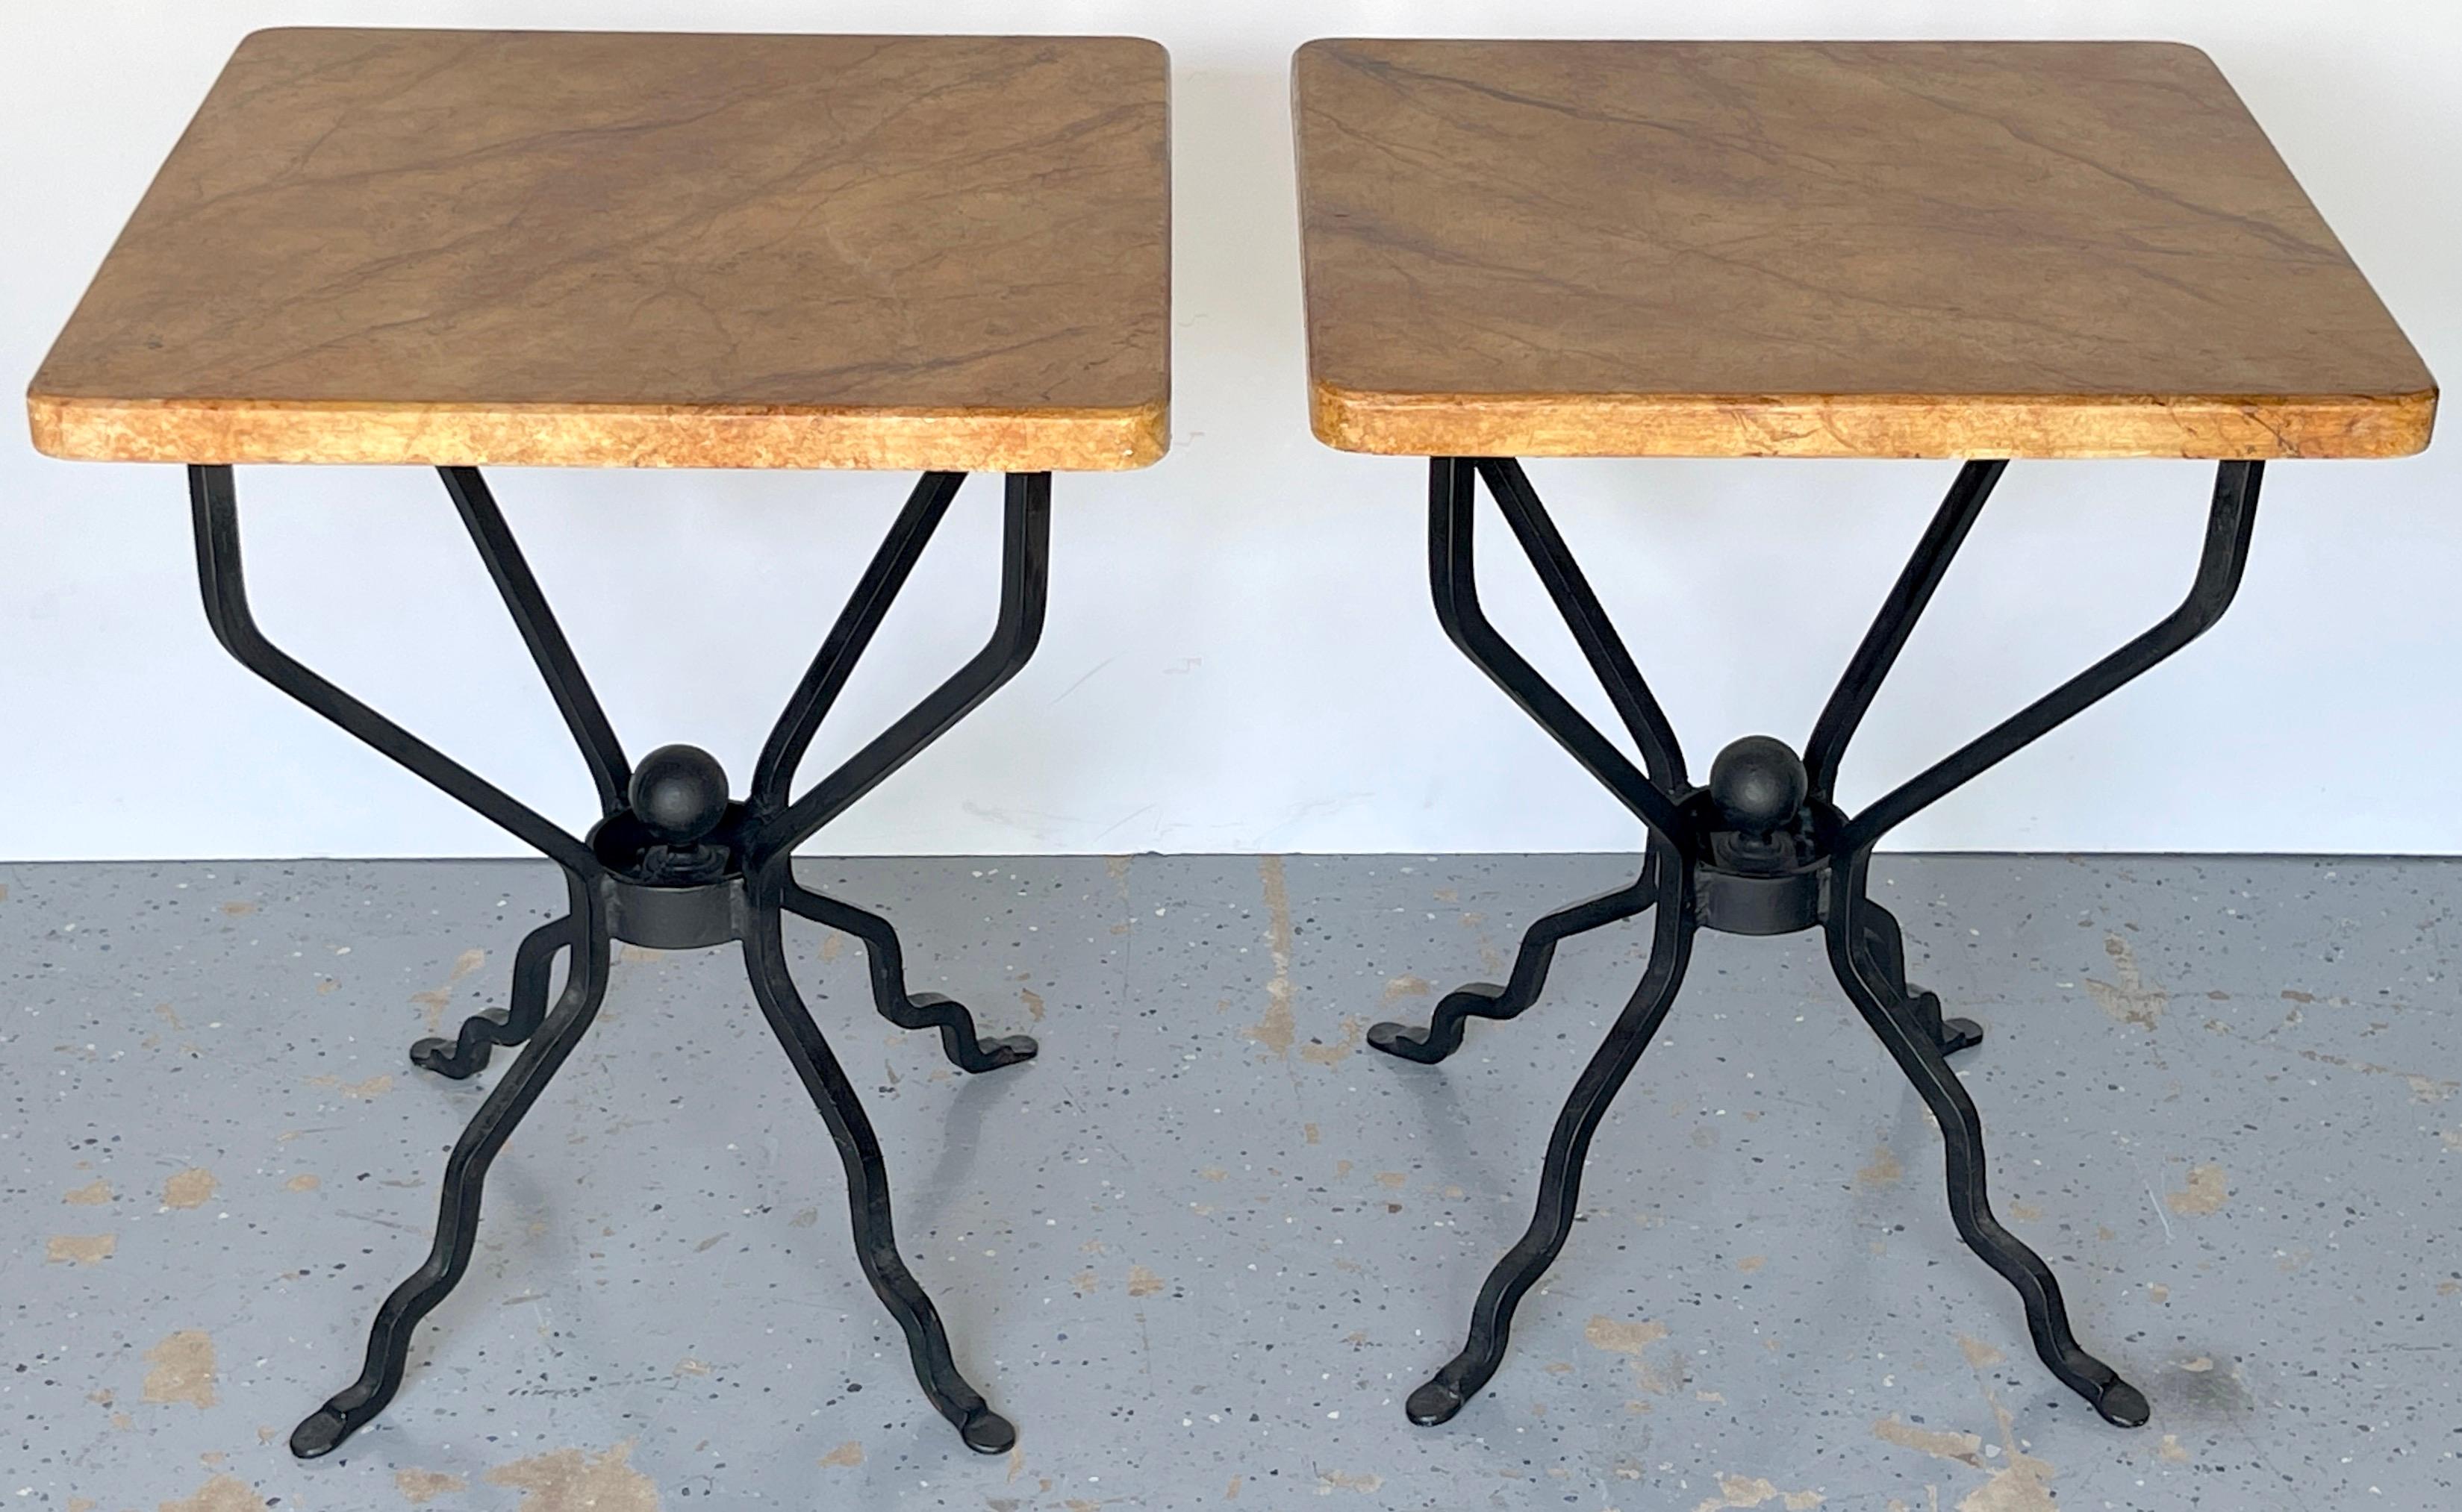 Pair of French Modern Iron & Marbleized Wood  End Tables 
French Designer, Circa 1950s

A  pair of stylish French Modern iron & marbleized wood end tables, designed in France in the the 1950s. These end tables exude understated elegance, making them